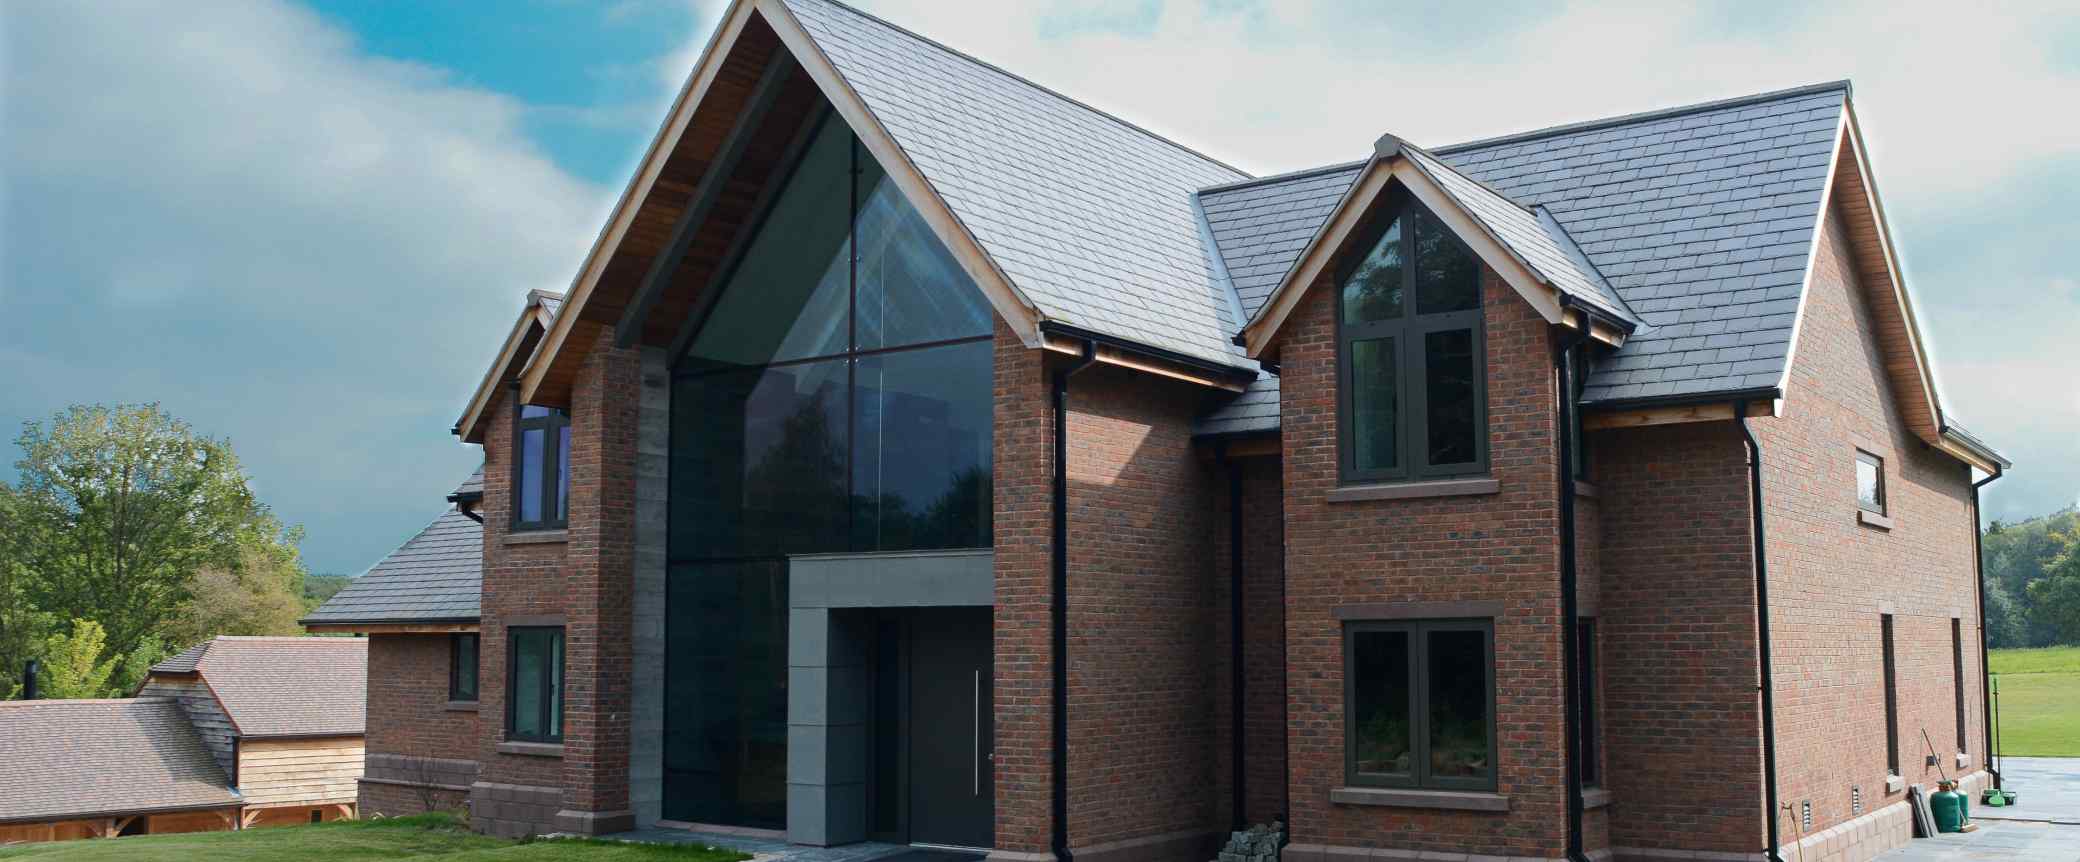 Replacement Dwelling - Norley, Cheshire